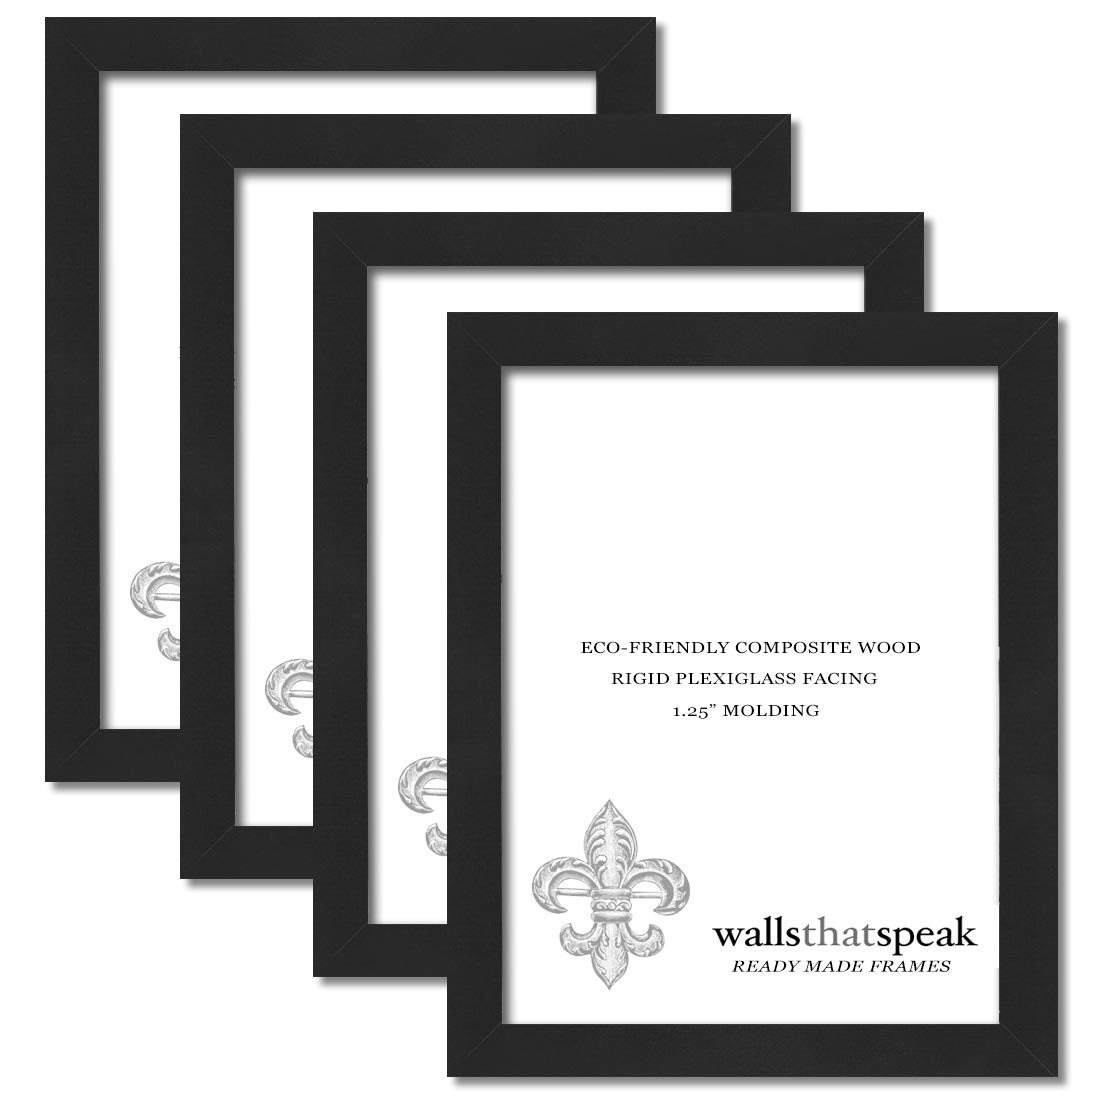 wallsthatspeak 10x15 Black Picture Frame for Puzzles Posters Photos or Artwork, Set of 4